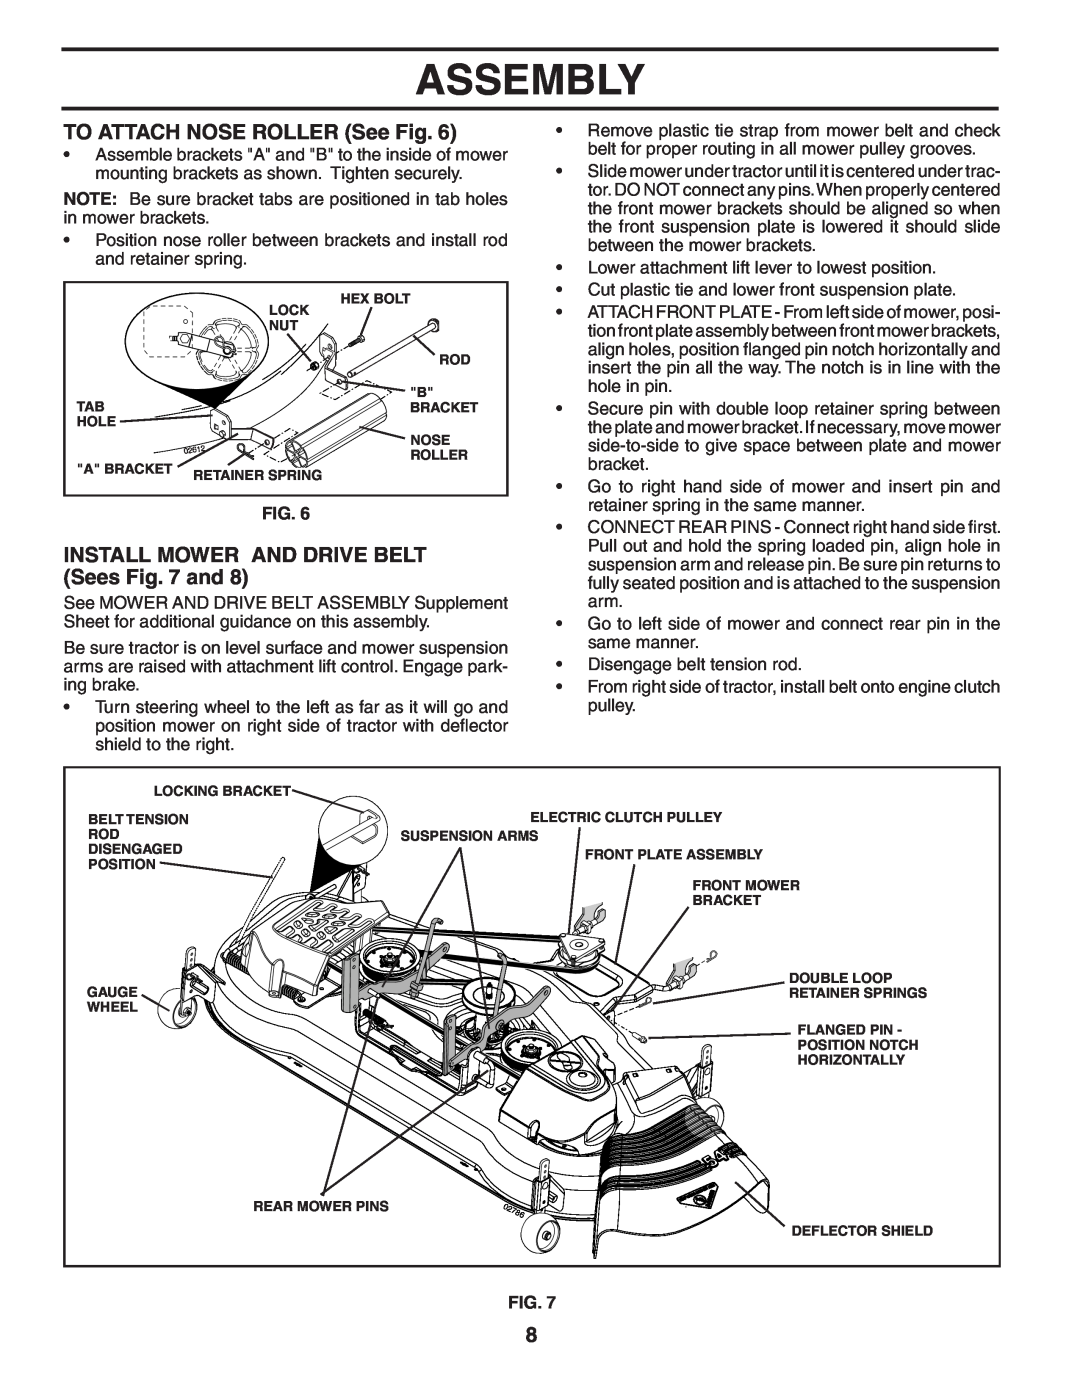 Poulan PBGT27H54 manual TO ATTACH NOSE ROLLER See Fig, INSTALL MOWER AND DRIVE BELT Sees and, Assembly 